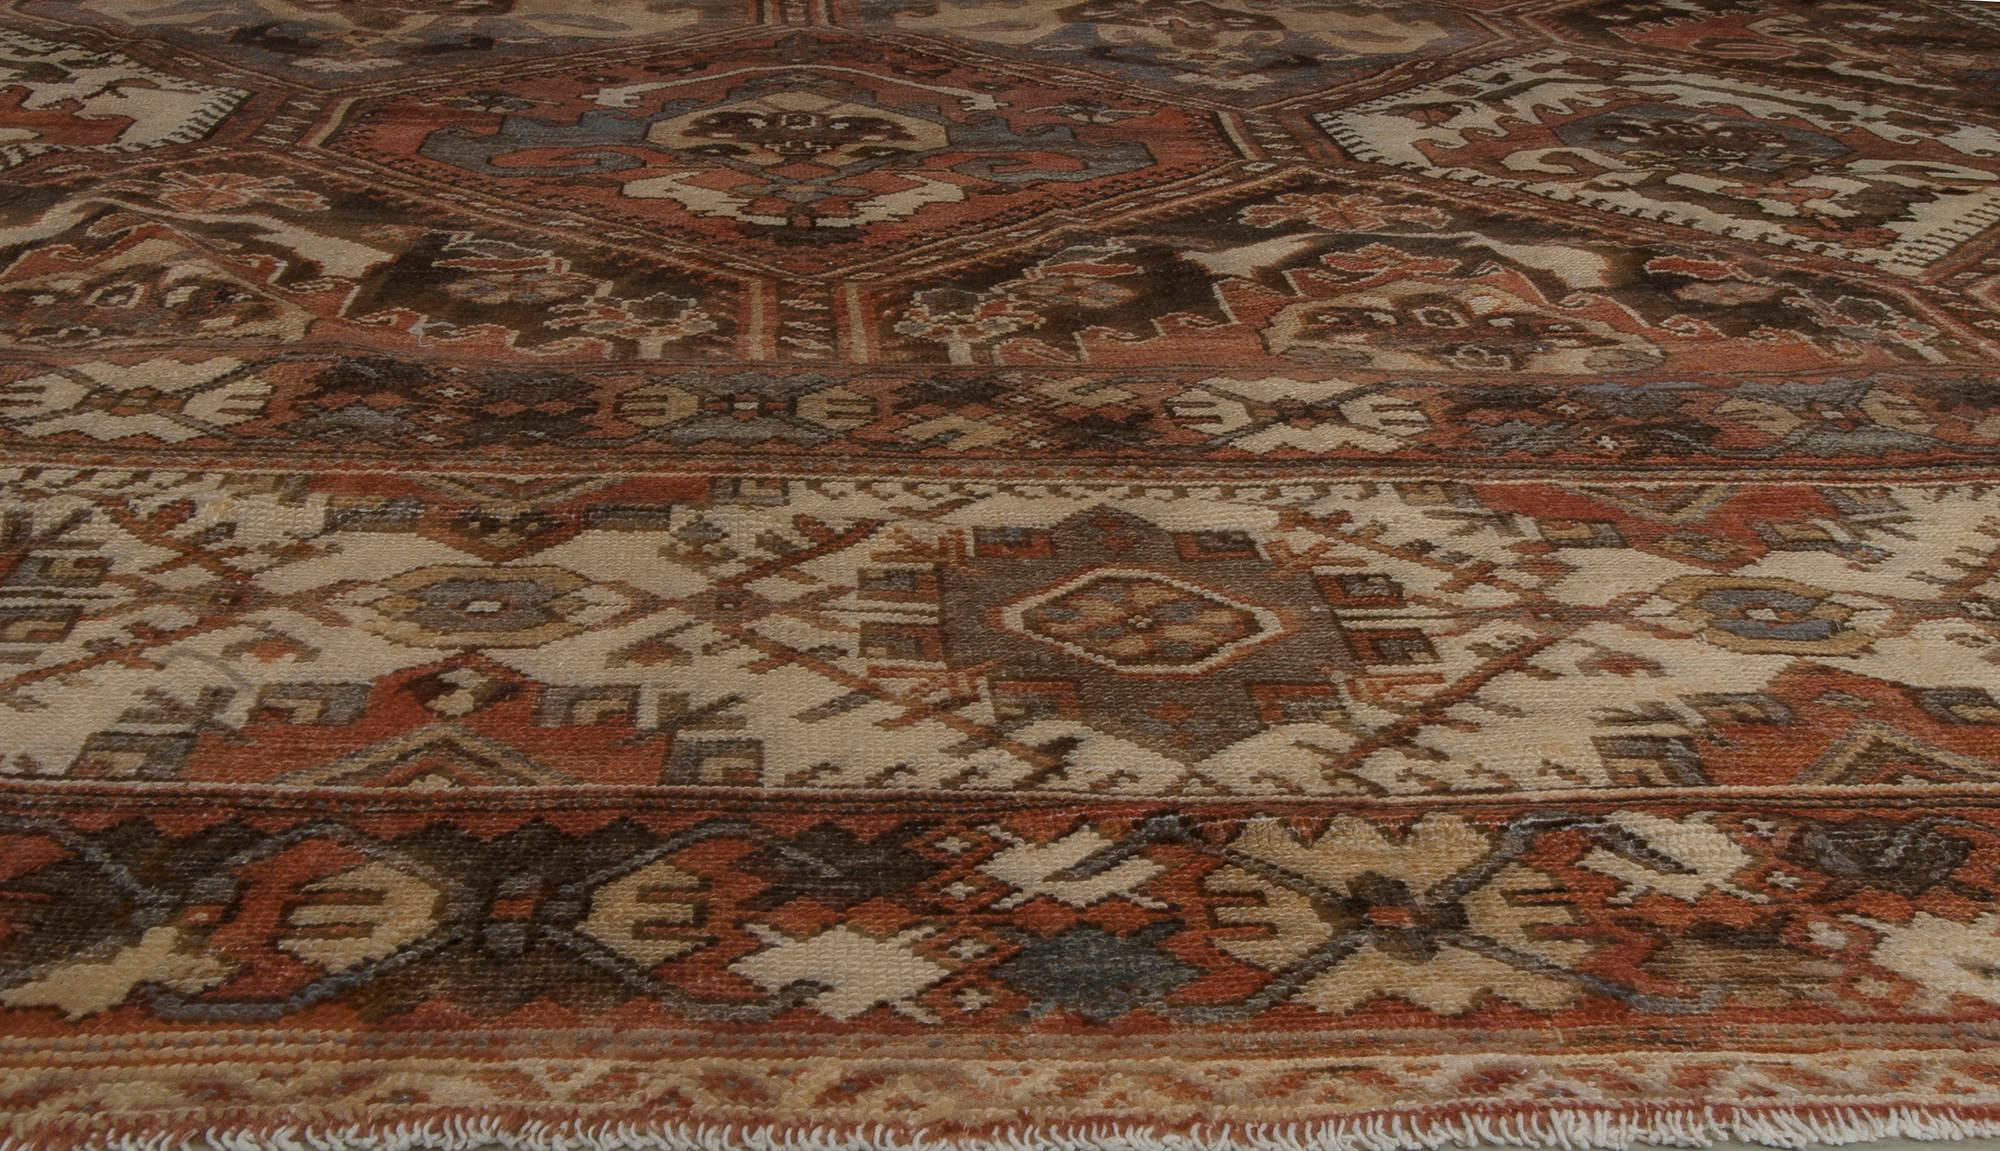 Authentic Persian Bakhtiari Handmade Wool Rug In Good Condition For Sale In New York, NY